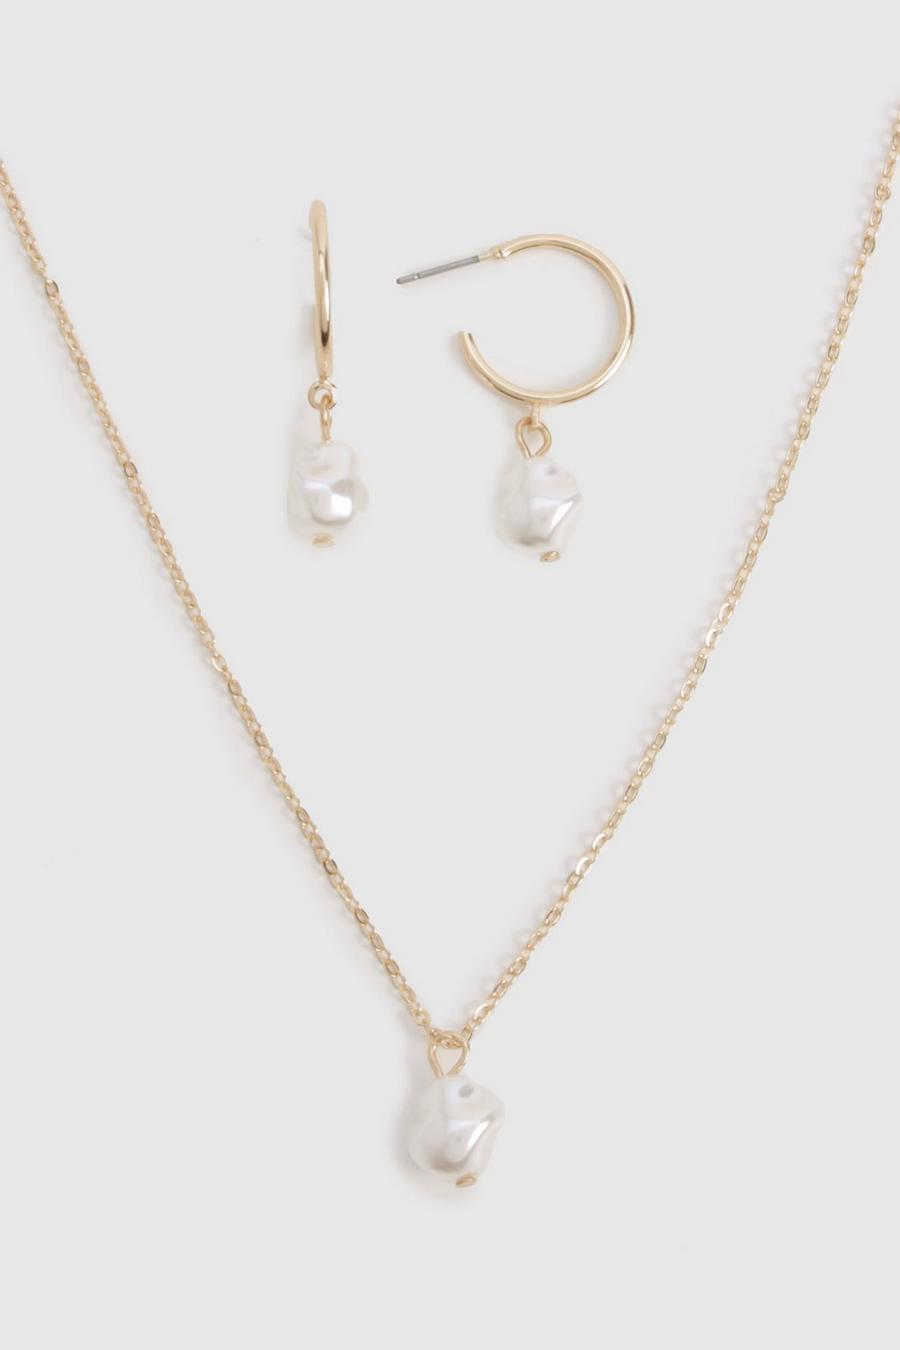 Gold Drop Pearl Hoop Earrings And Necklace Set